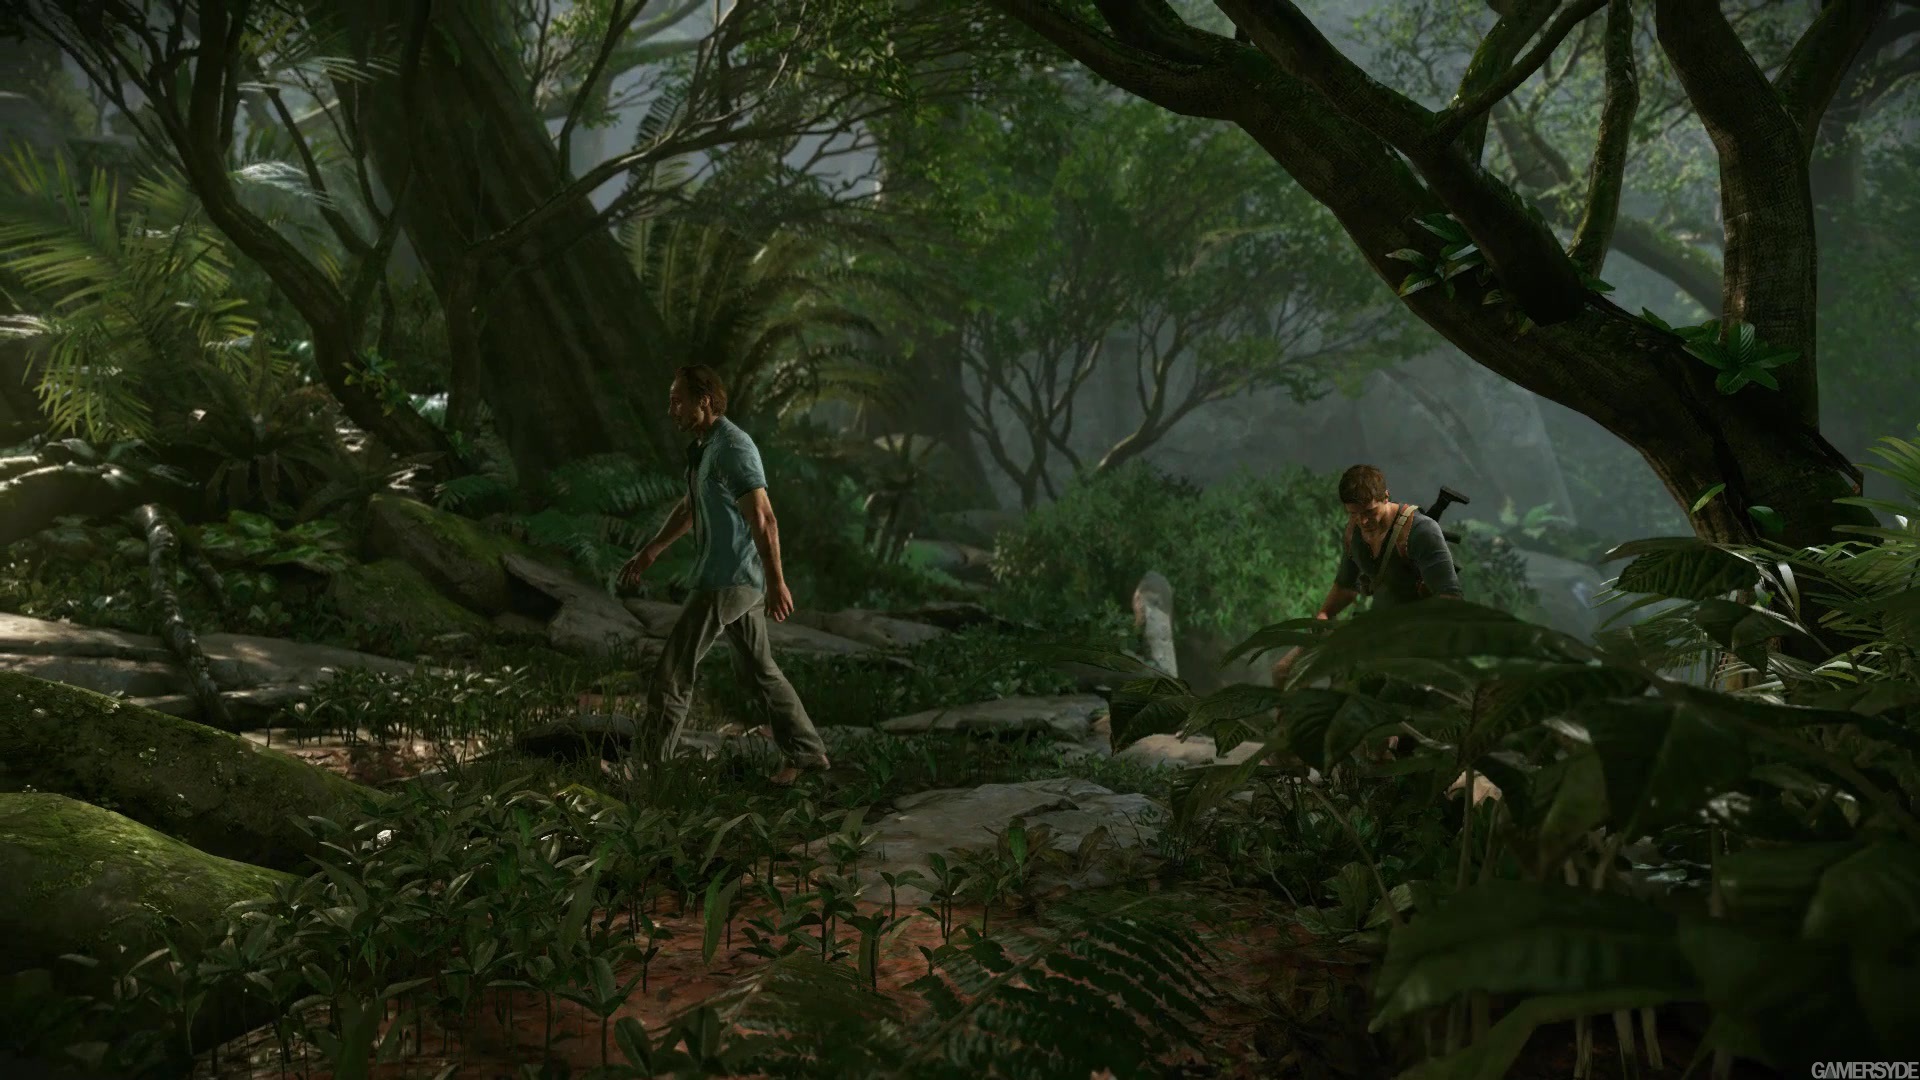 image_uncharted_4_a_thief_s_end-27145-2995_0032.jpg